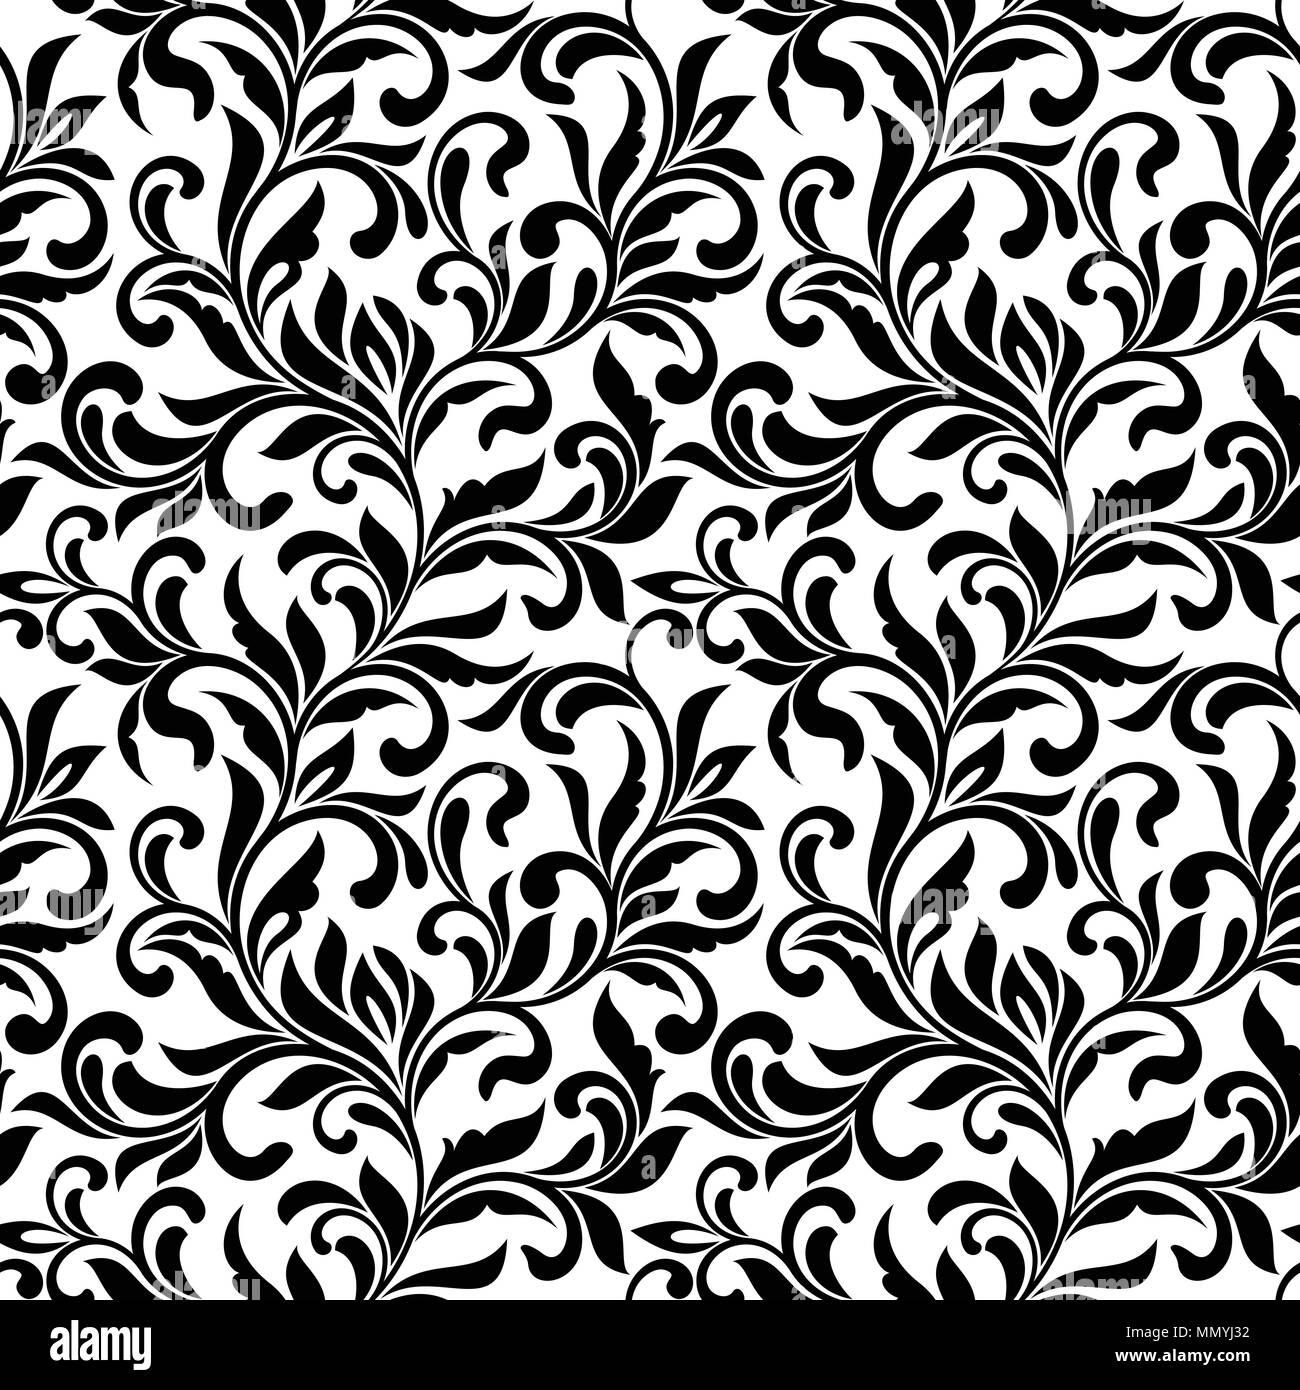 https://c8.alamy.com/comp/MMYJ32/elegant-seamless-pattern-tracery-of-swirls-and-decorative-leaves-isolated-on-a-white-background-vintage-style-it-can-be-used-for-printing-on-fabric-MMYJ32.jpg